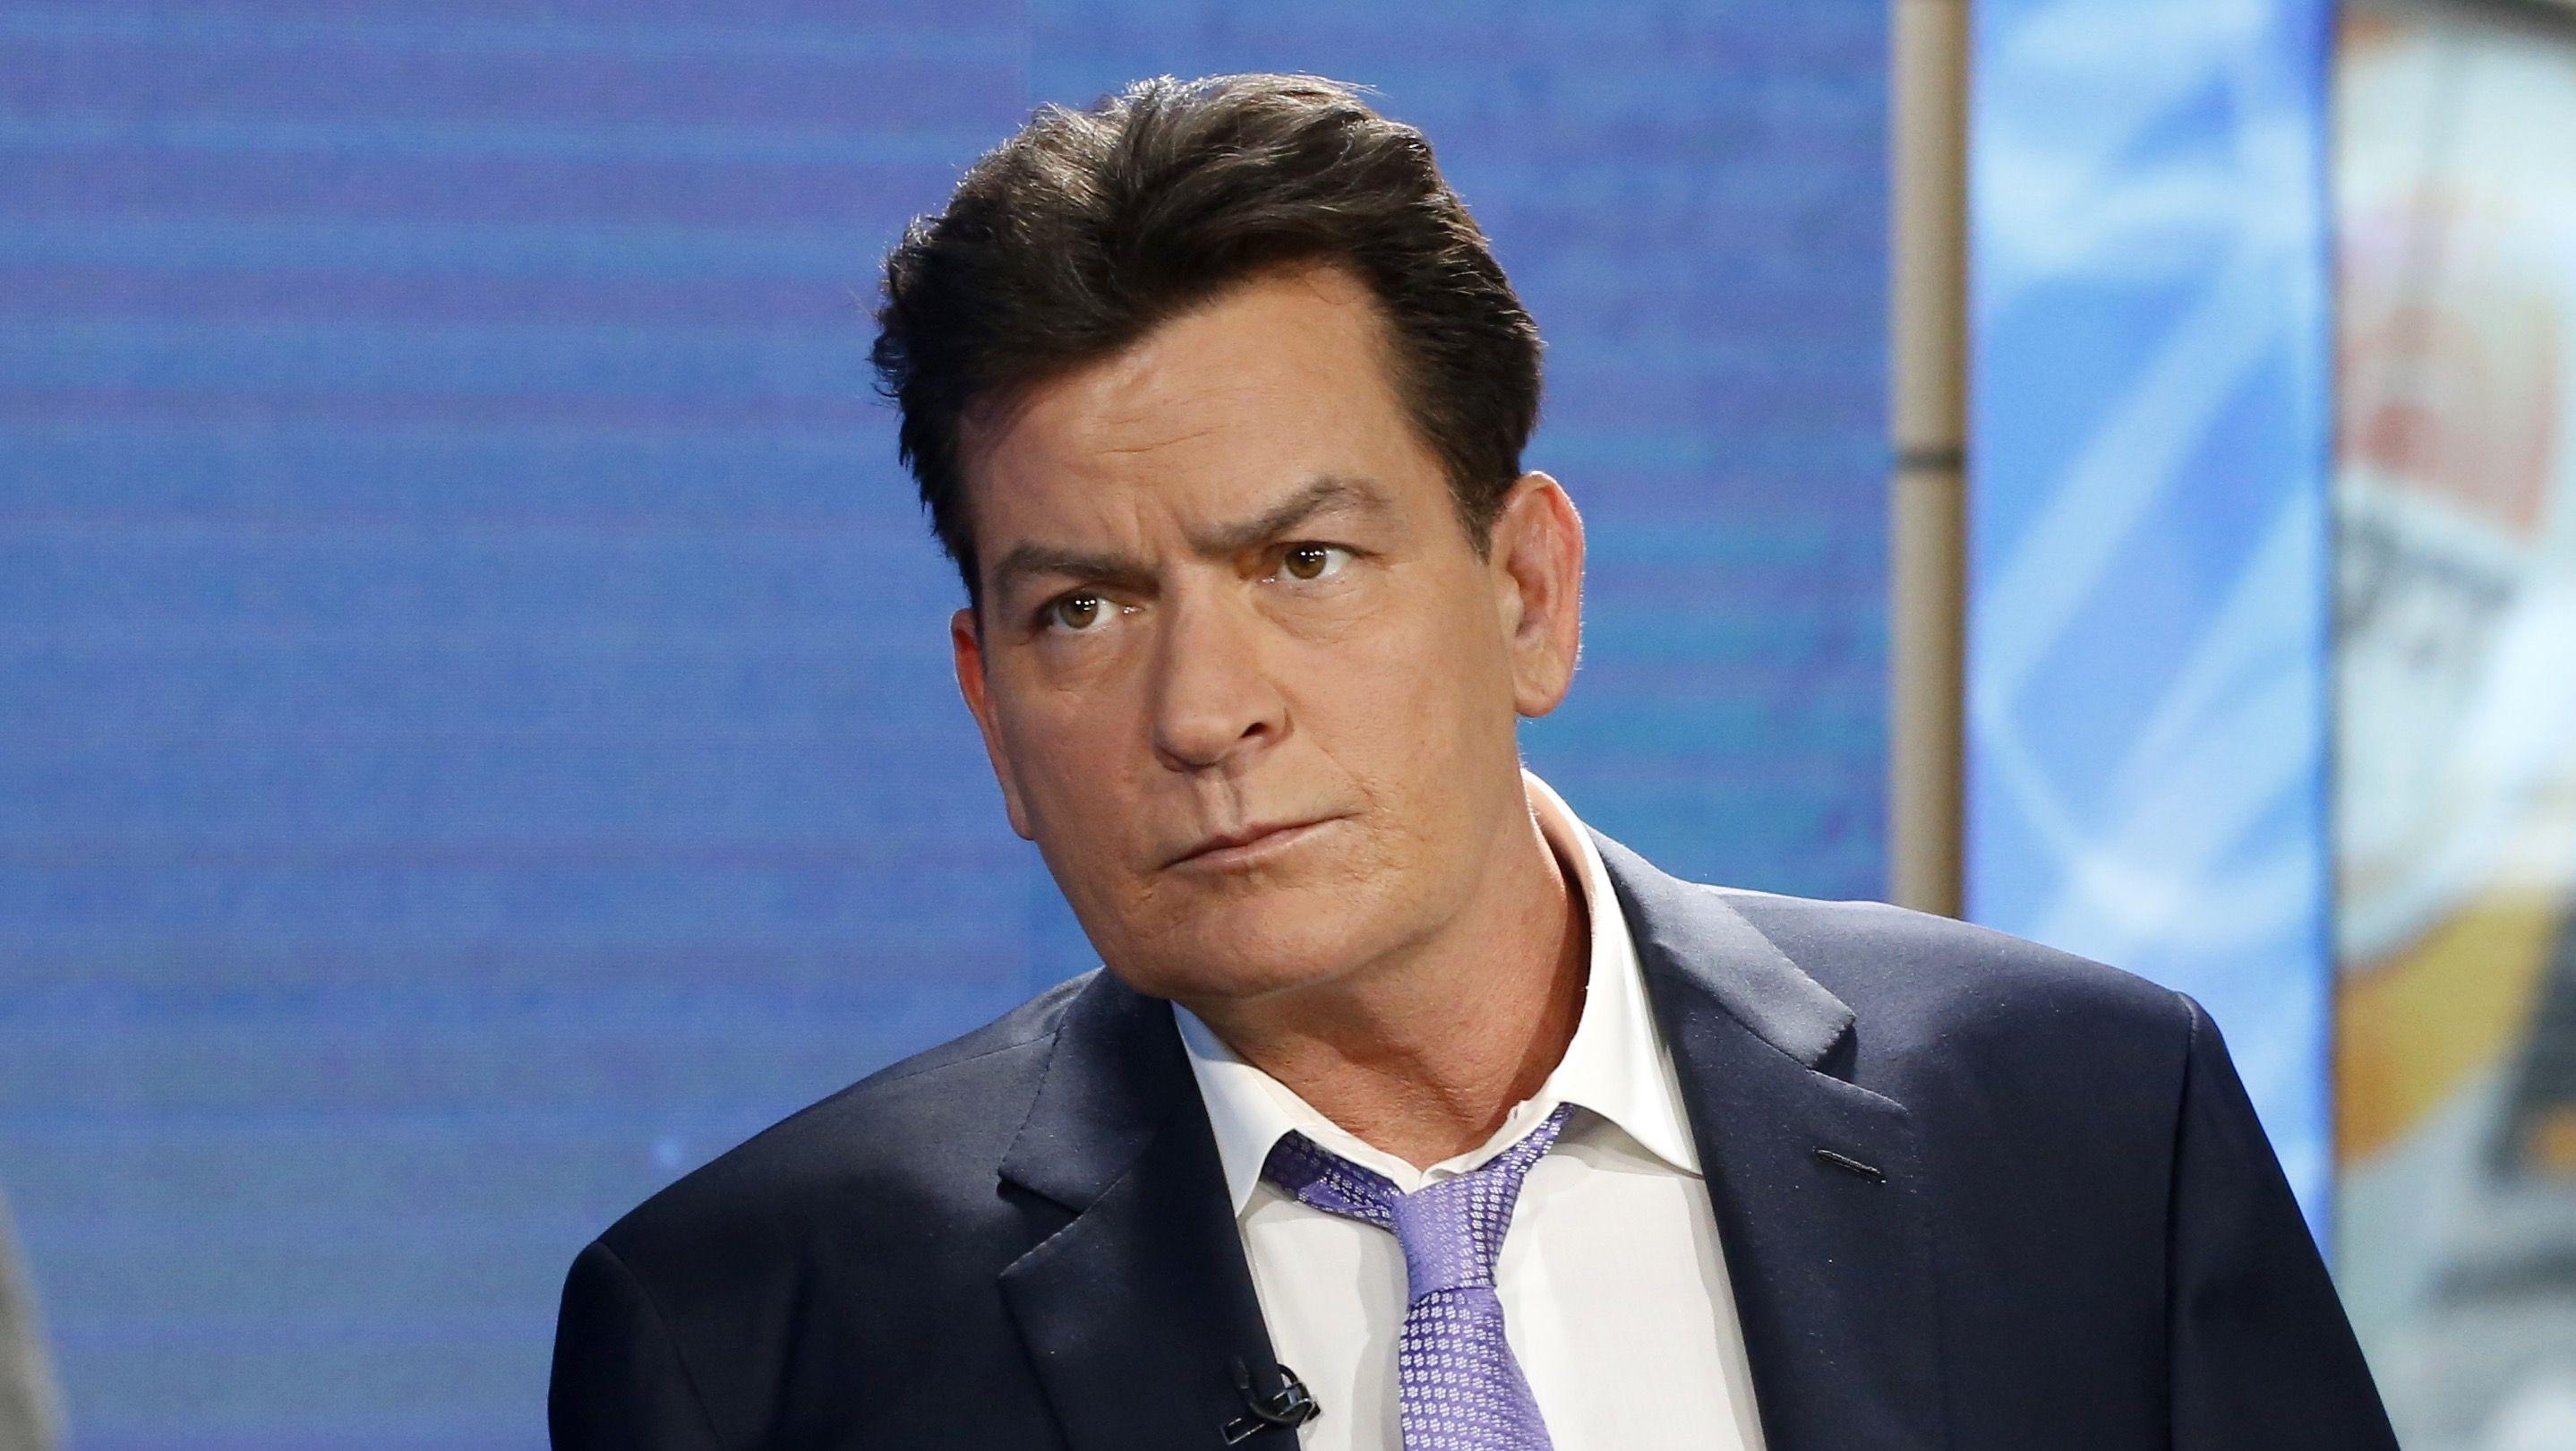 Charlie Sheen's Open Letter On HIV Positive Diagnosis